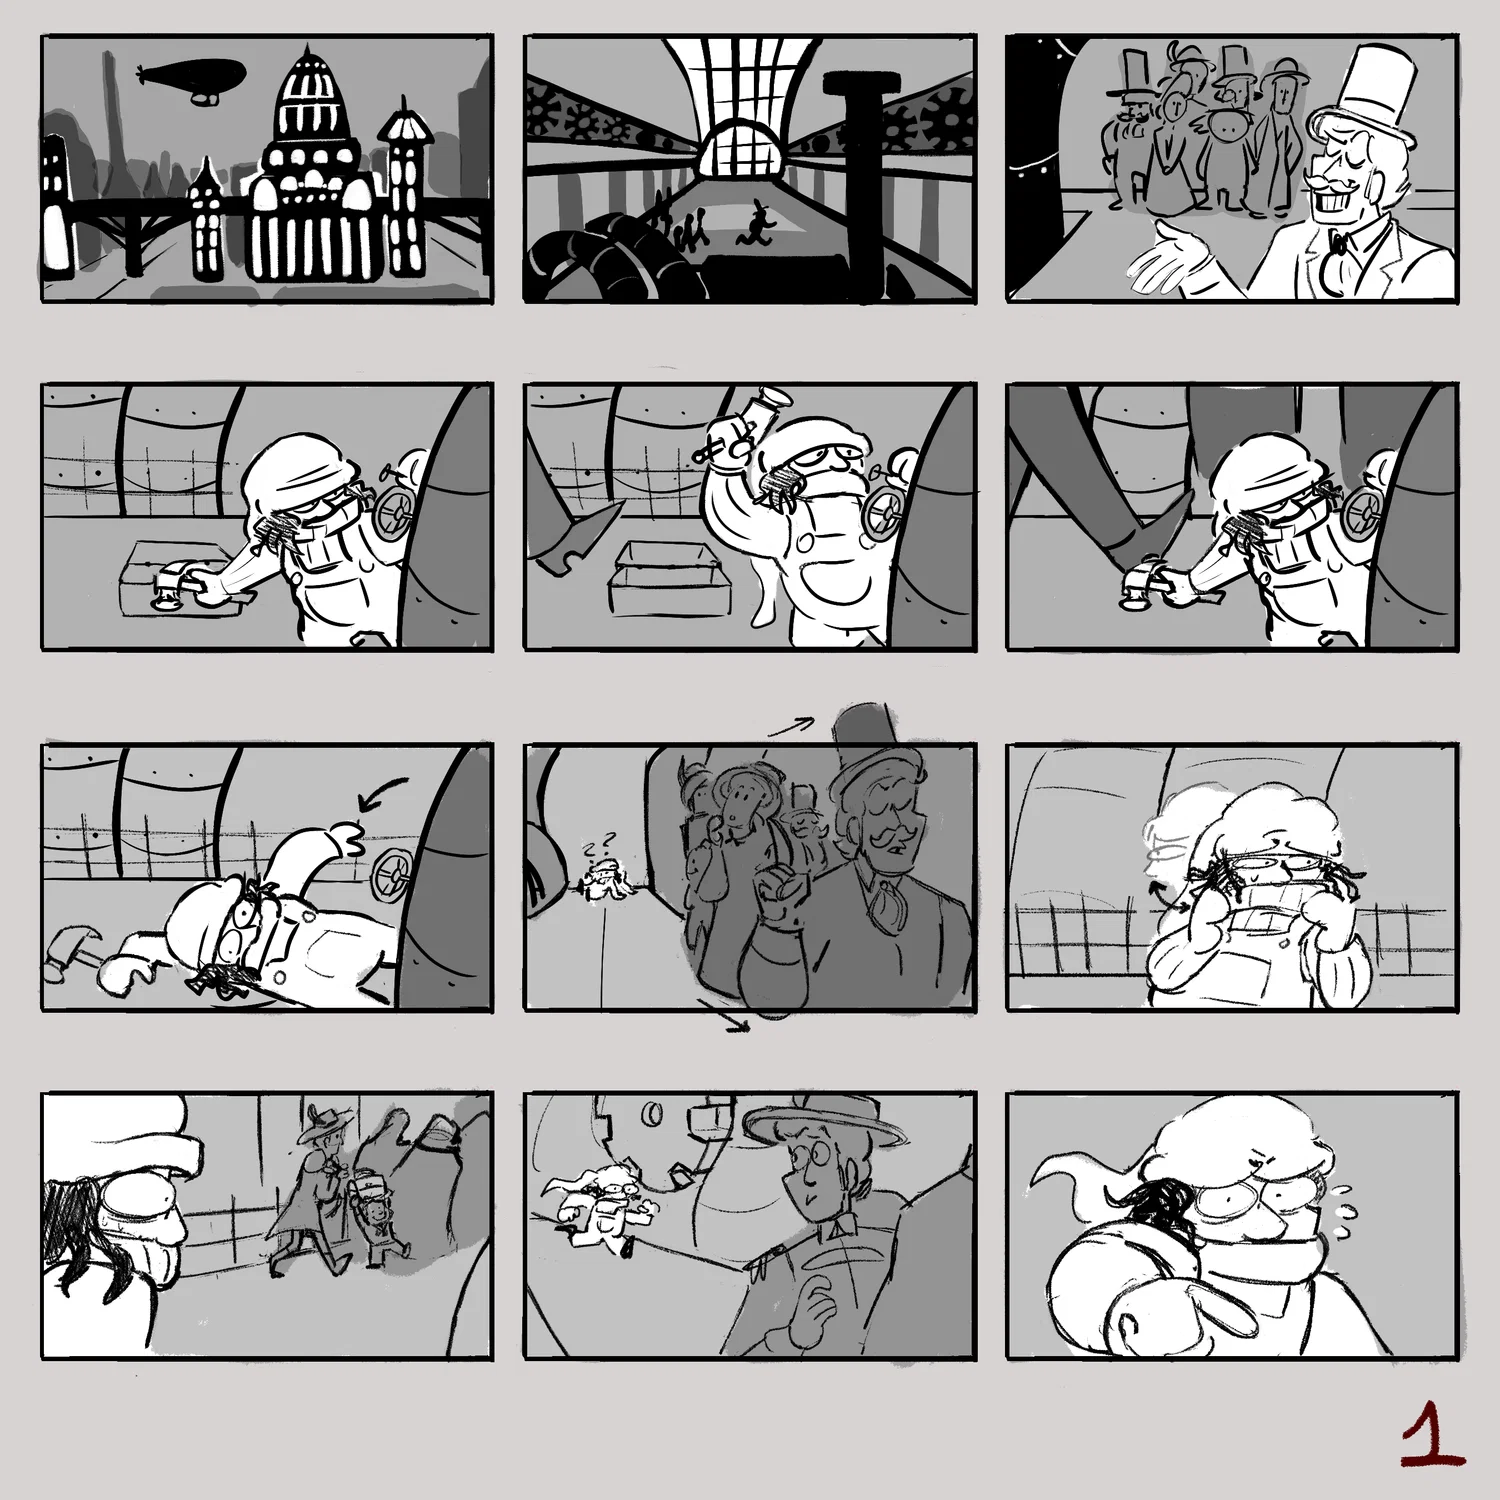 The first page of a storyboarded sequence, scene details a tour within an old factory